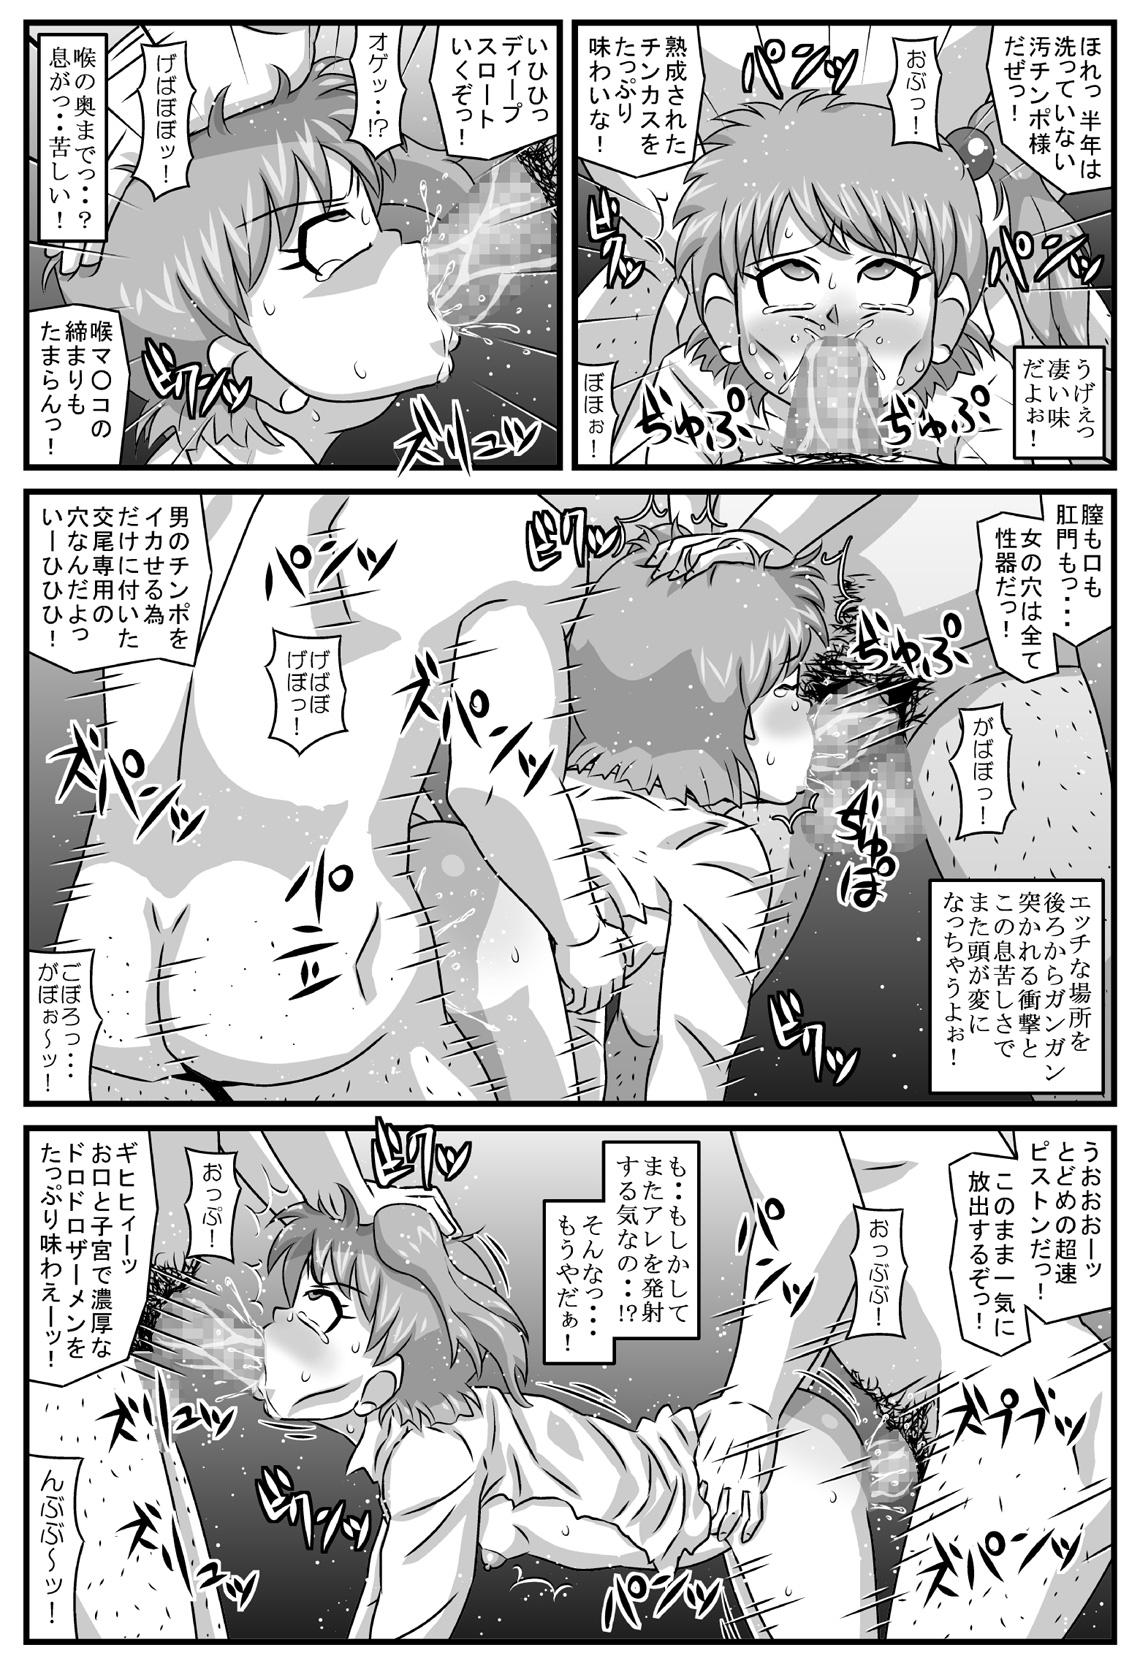 Squirt Maniac festival of the In Haru - Super robot wars Anal Sex - Page 12